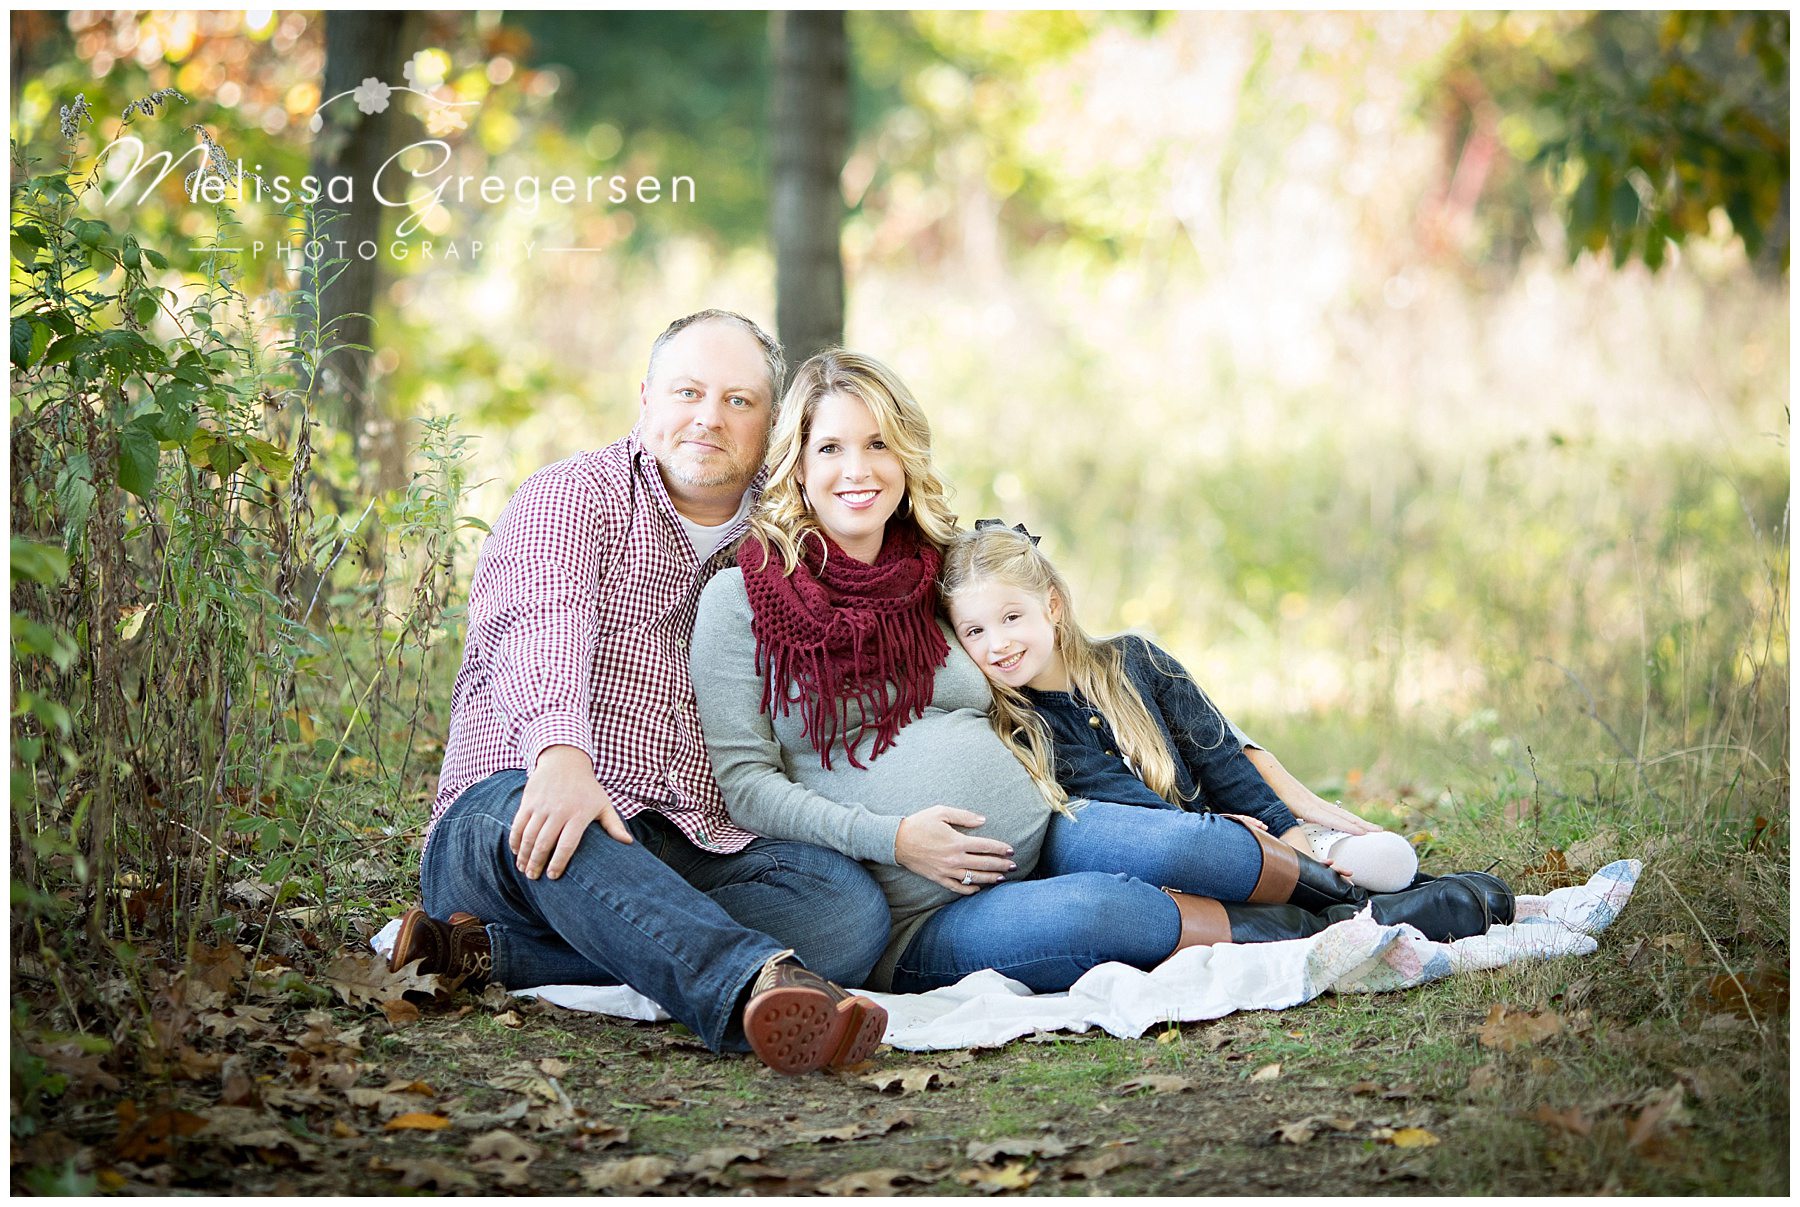 Maternity Family Photography Session at Bow in the Clouds Nature Preserve